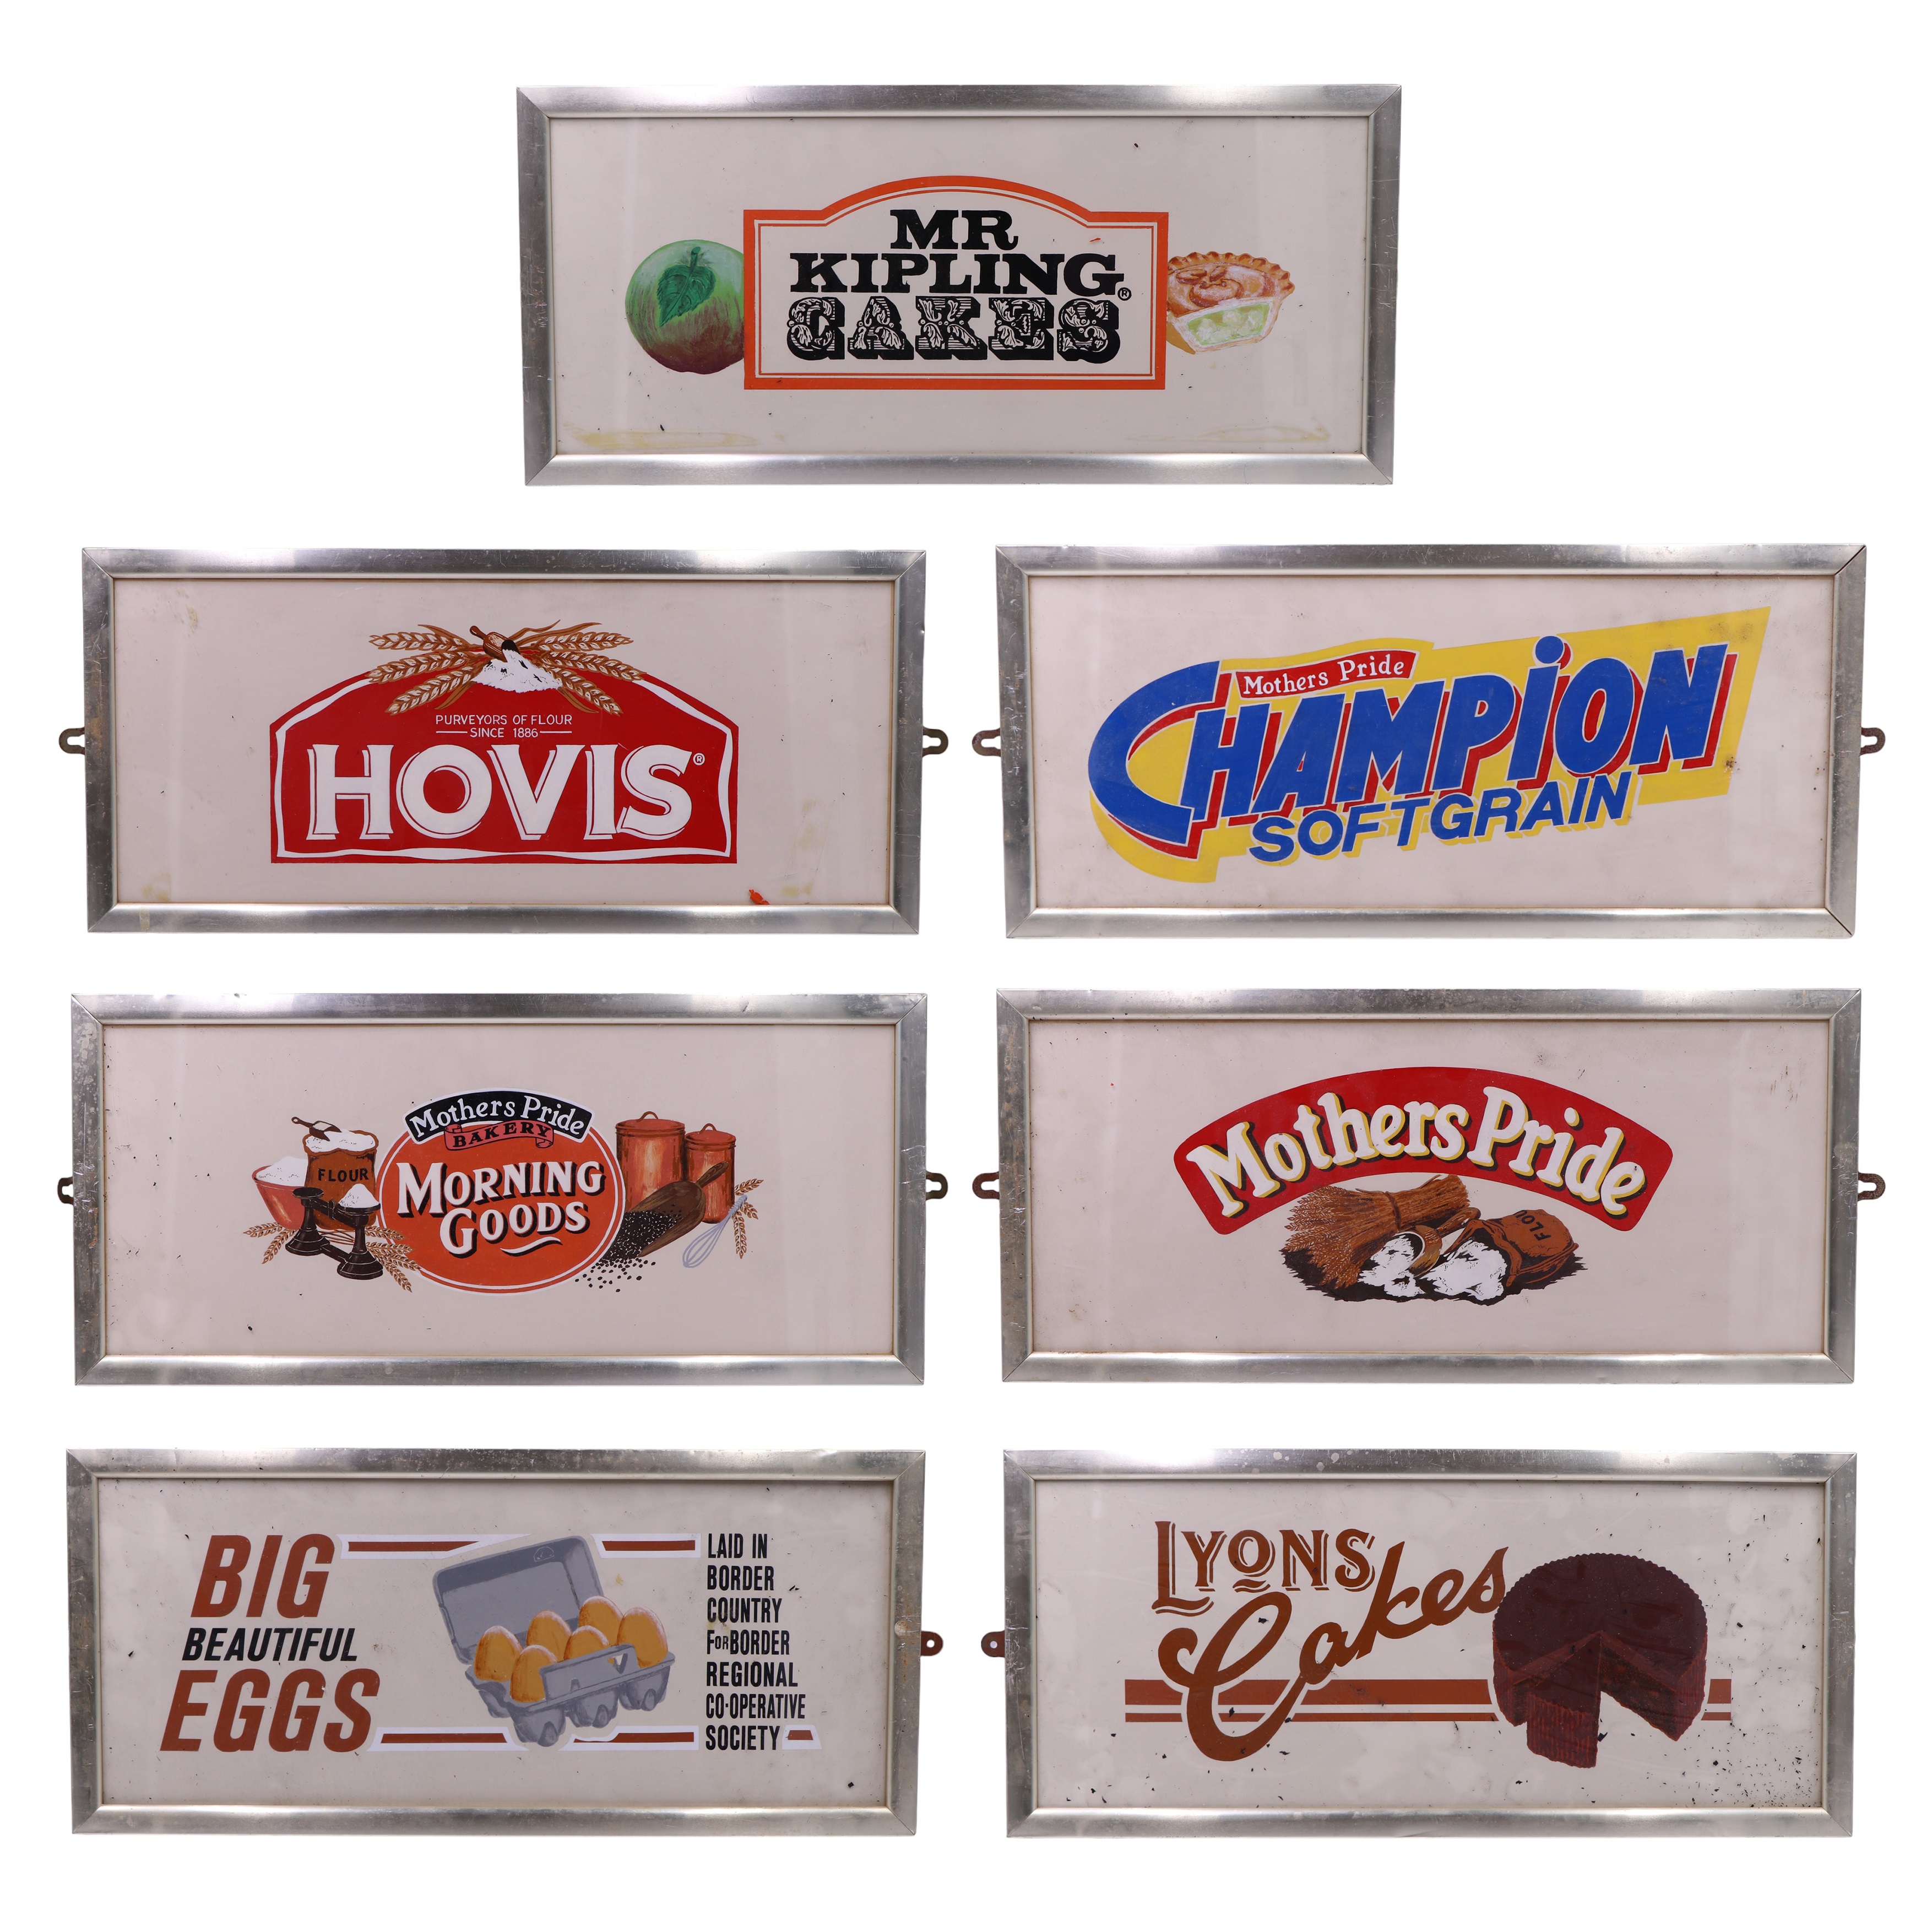 Seven hand-painted and transfer-printed advertising boards including Lyons Cakes, Hovis, and Mr